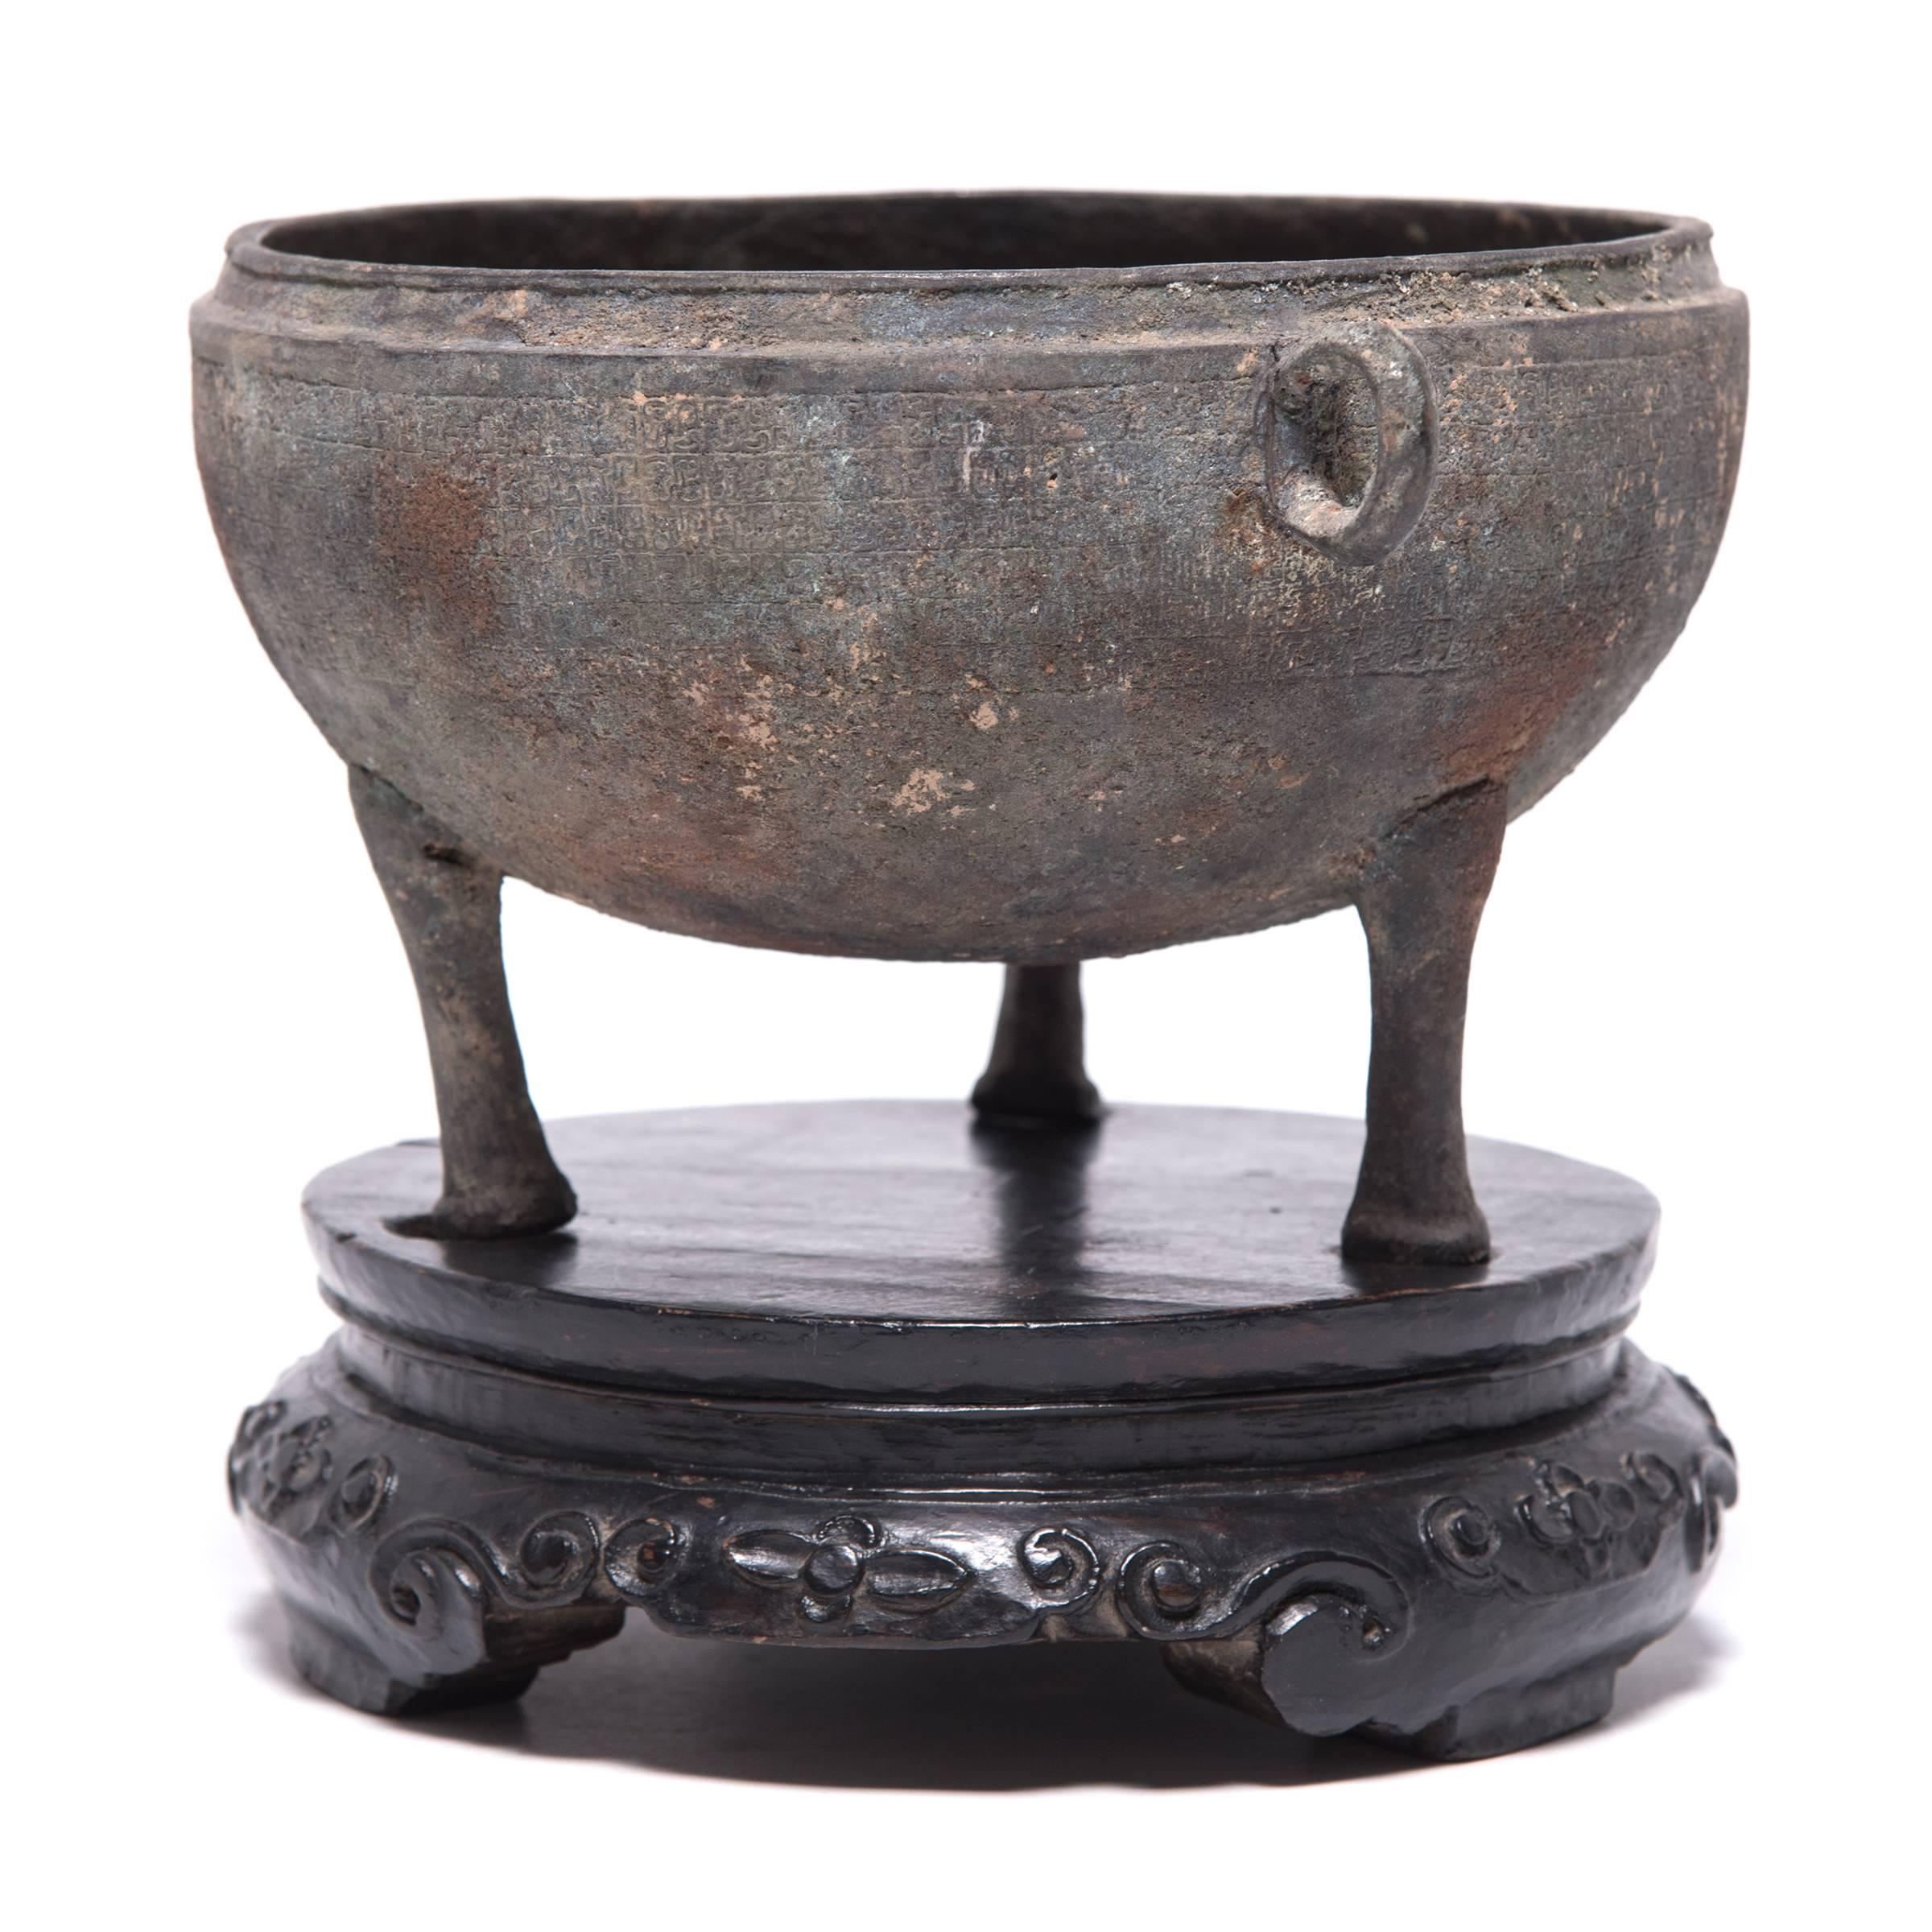 This 18th century bronze vessel with tripod feet was crafted by hand in a traditional Chinese shape known as 